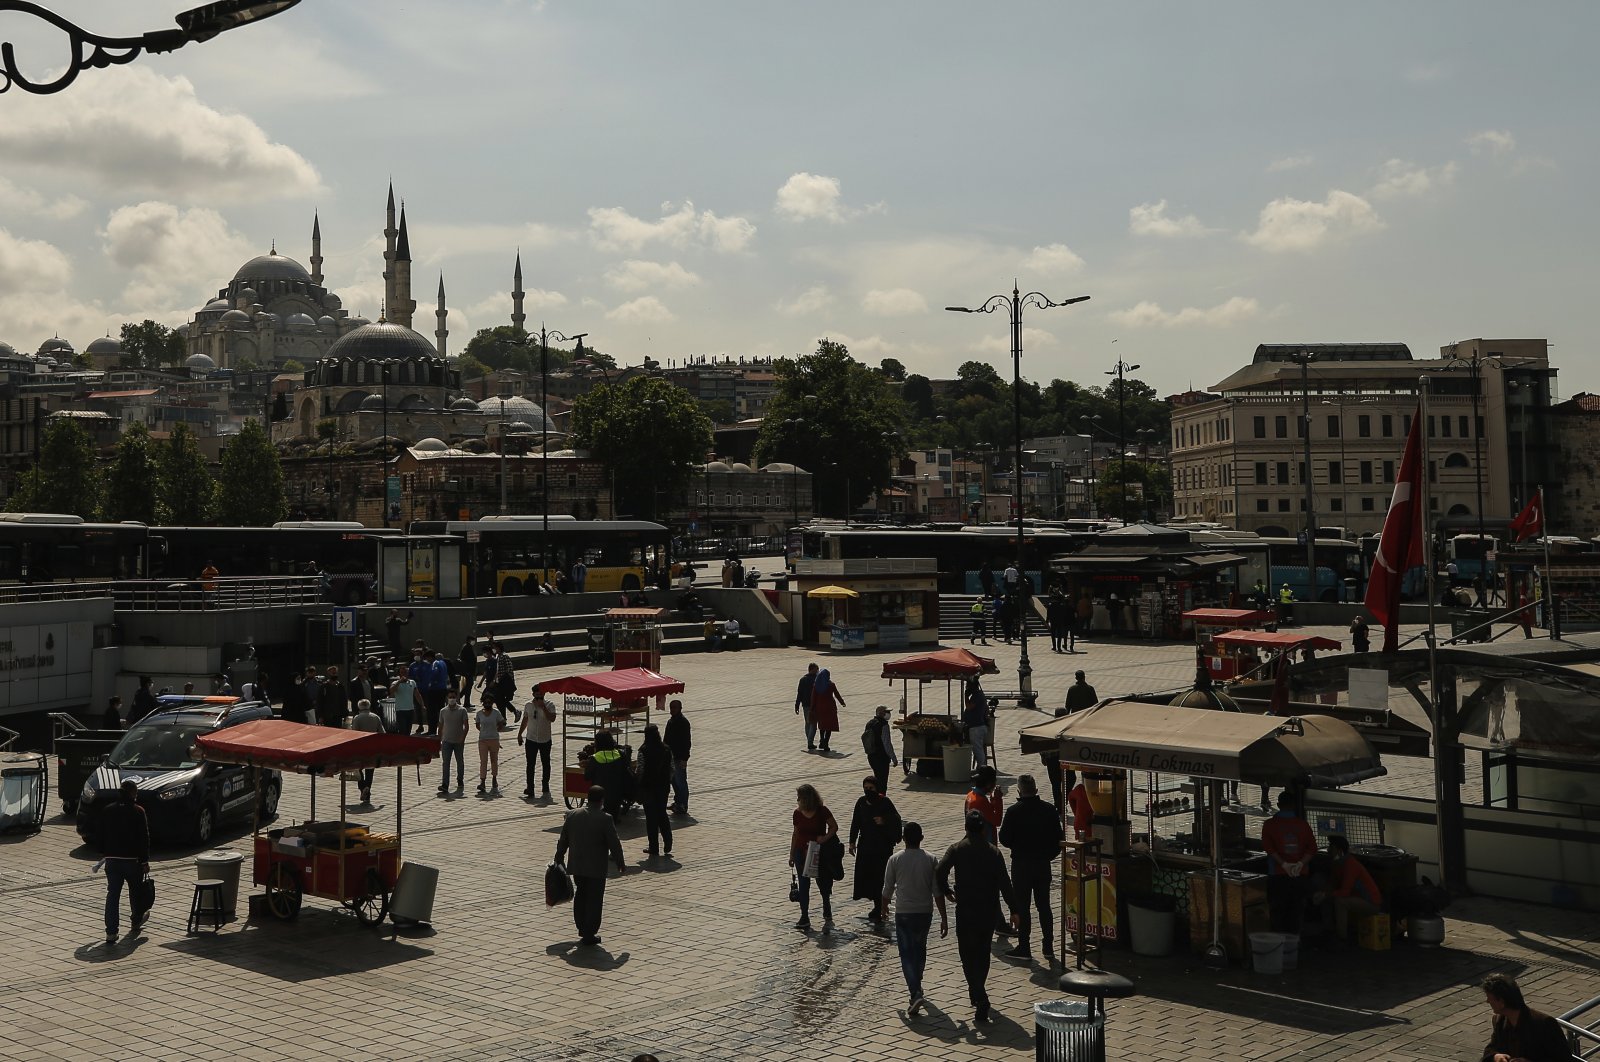 People walk in Istanbul, as shops reopen following weeks of closures due to the coronavirus pandemic, June 1, 2020. (AP Photo)